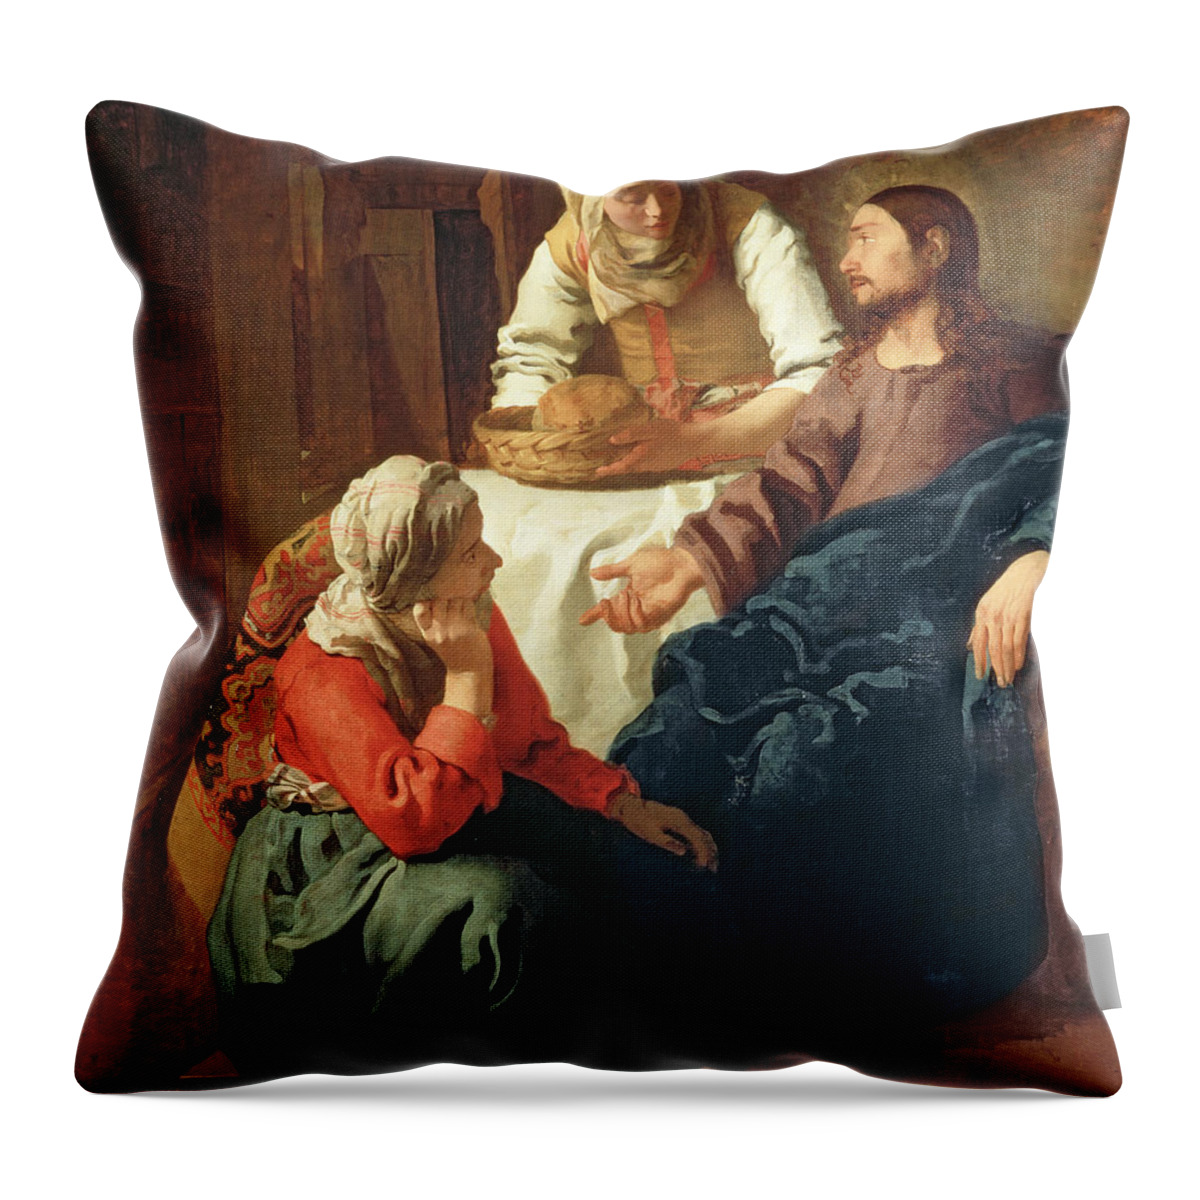 Vermeer Throw Pillow featuring the painting Christ In The House Of Martha And Mary by Jan Vermeer